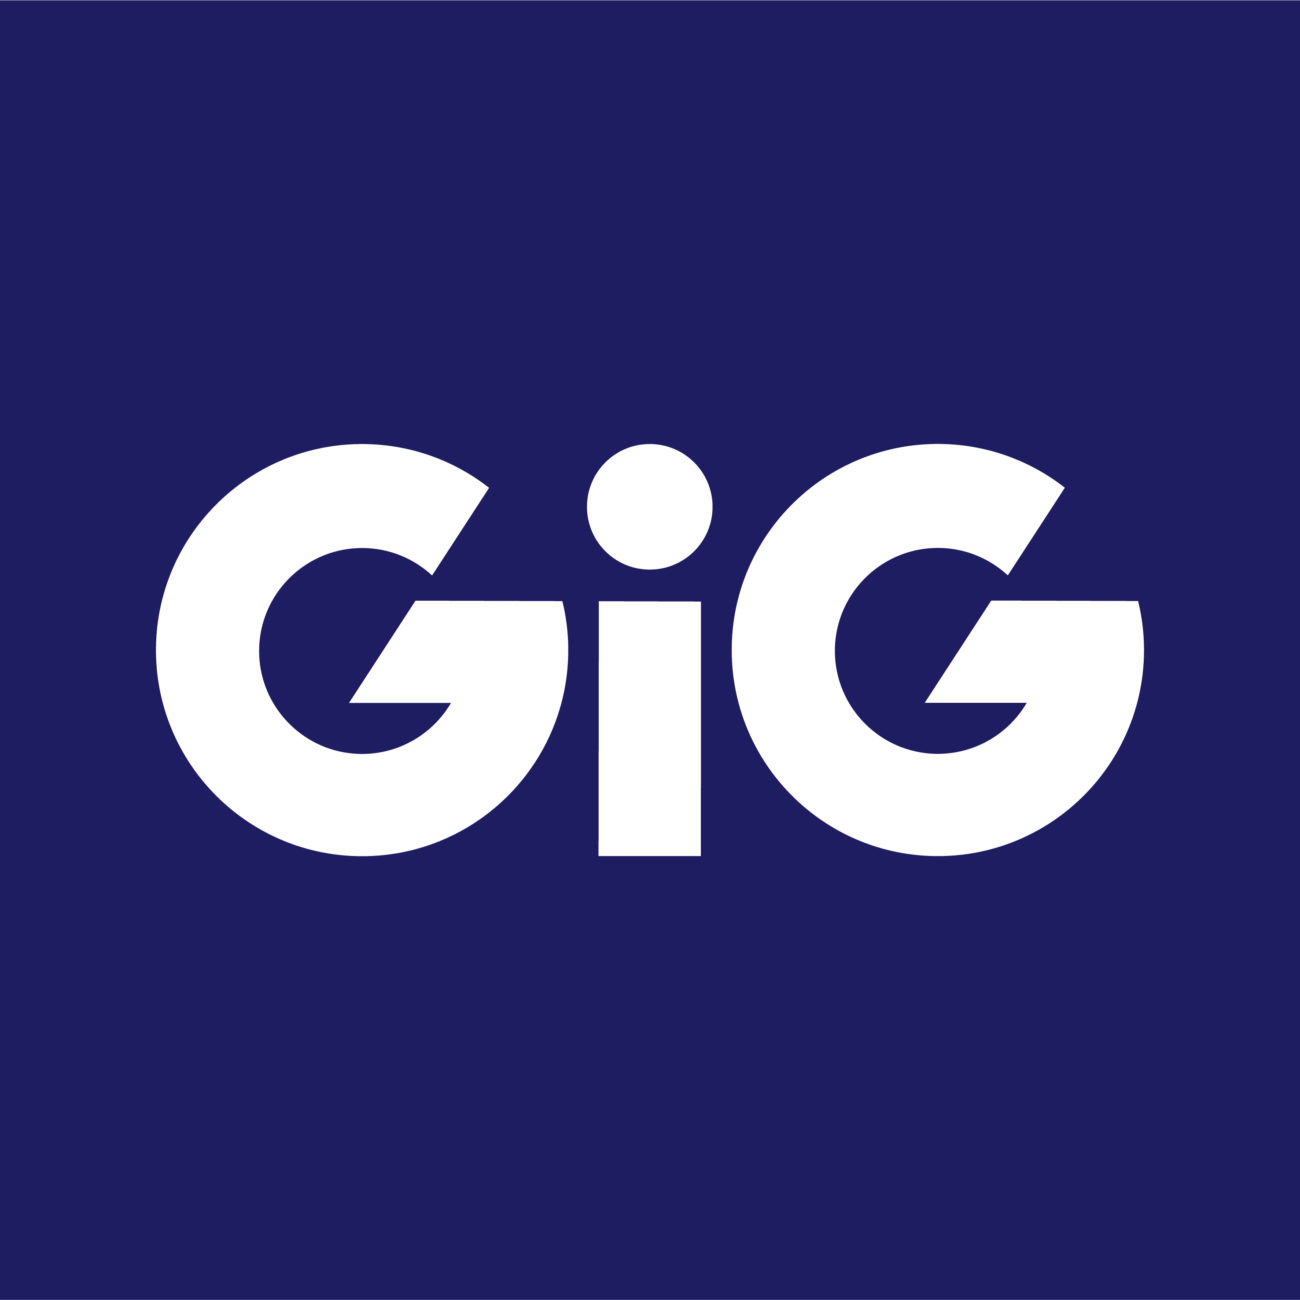 GiG adds Rainmaker to its list of partners for GiG Comply